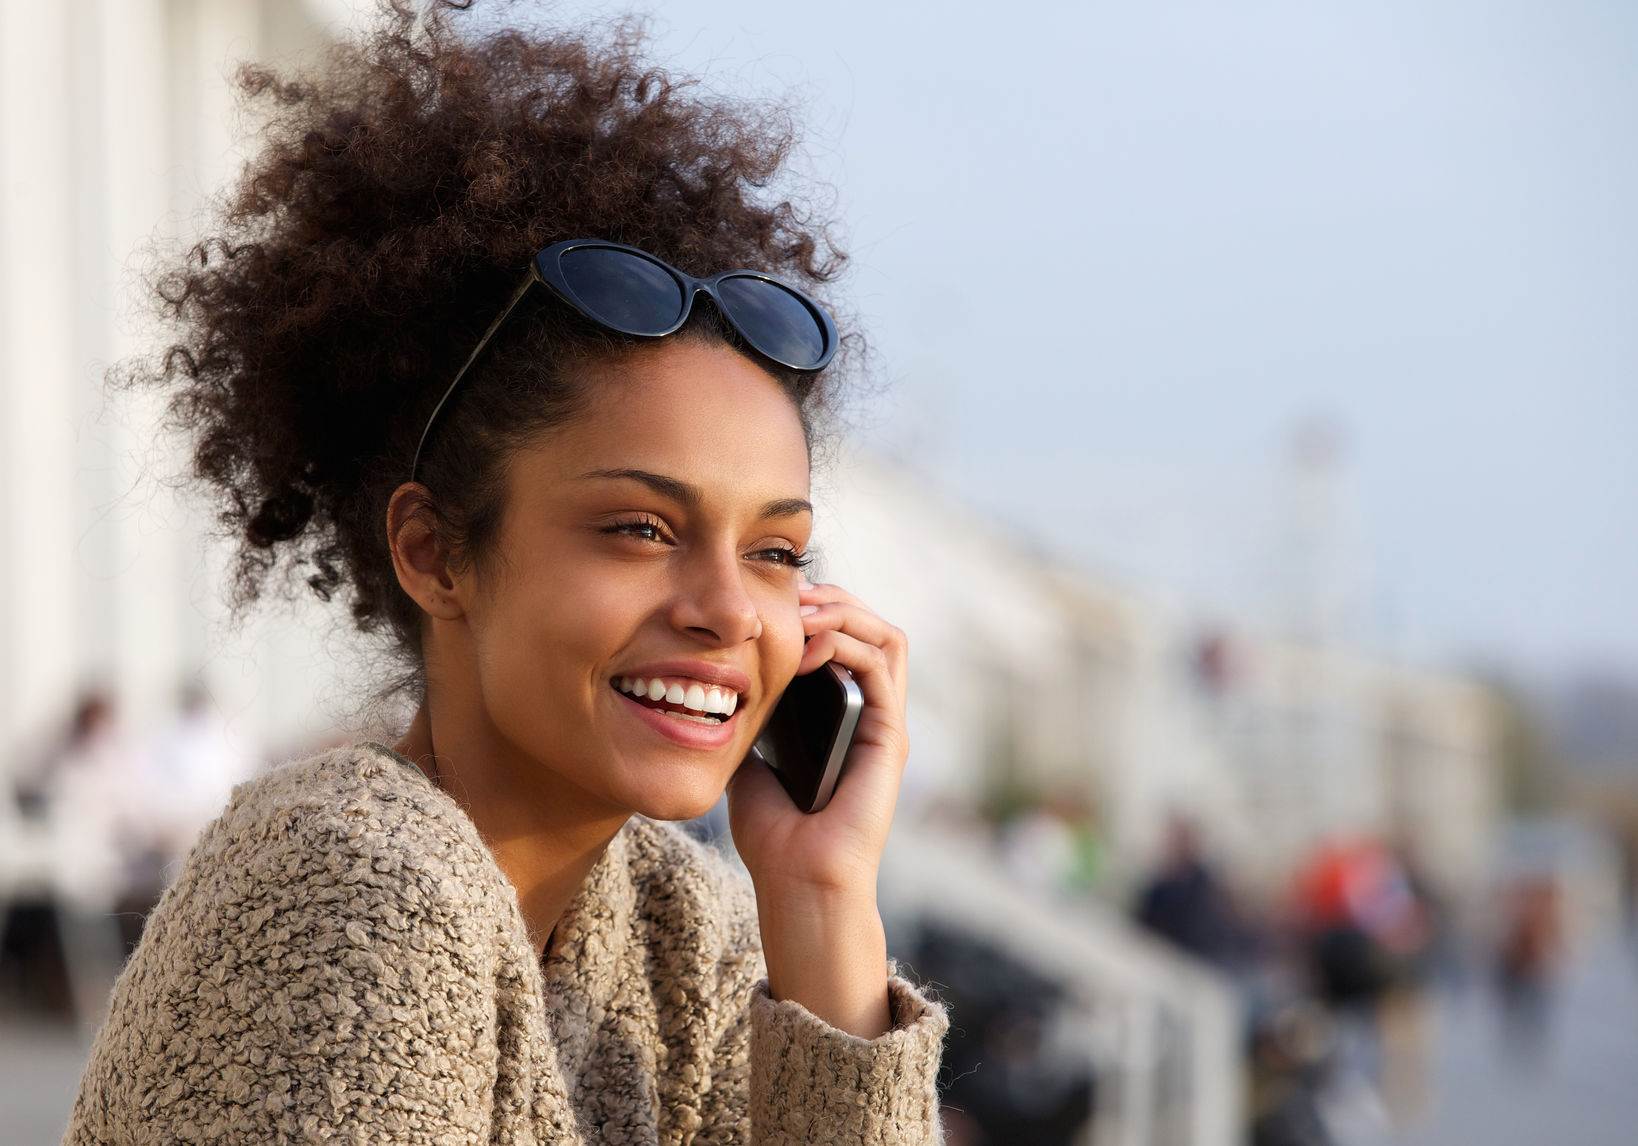 40345571 - close up portrait of an attractive young woman smiling and talking on mobile phone